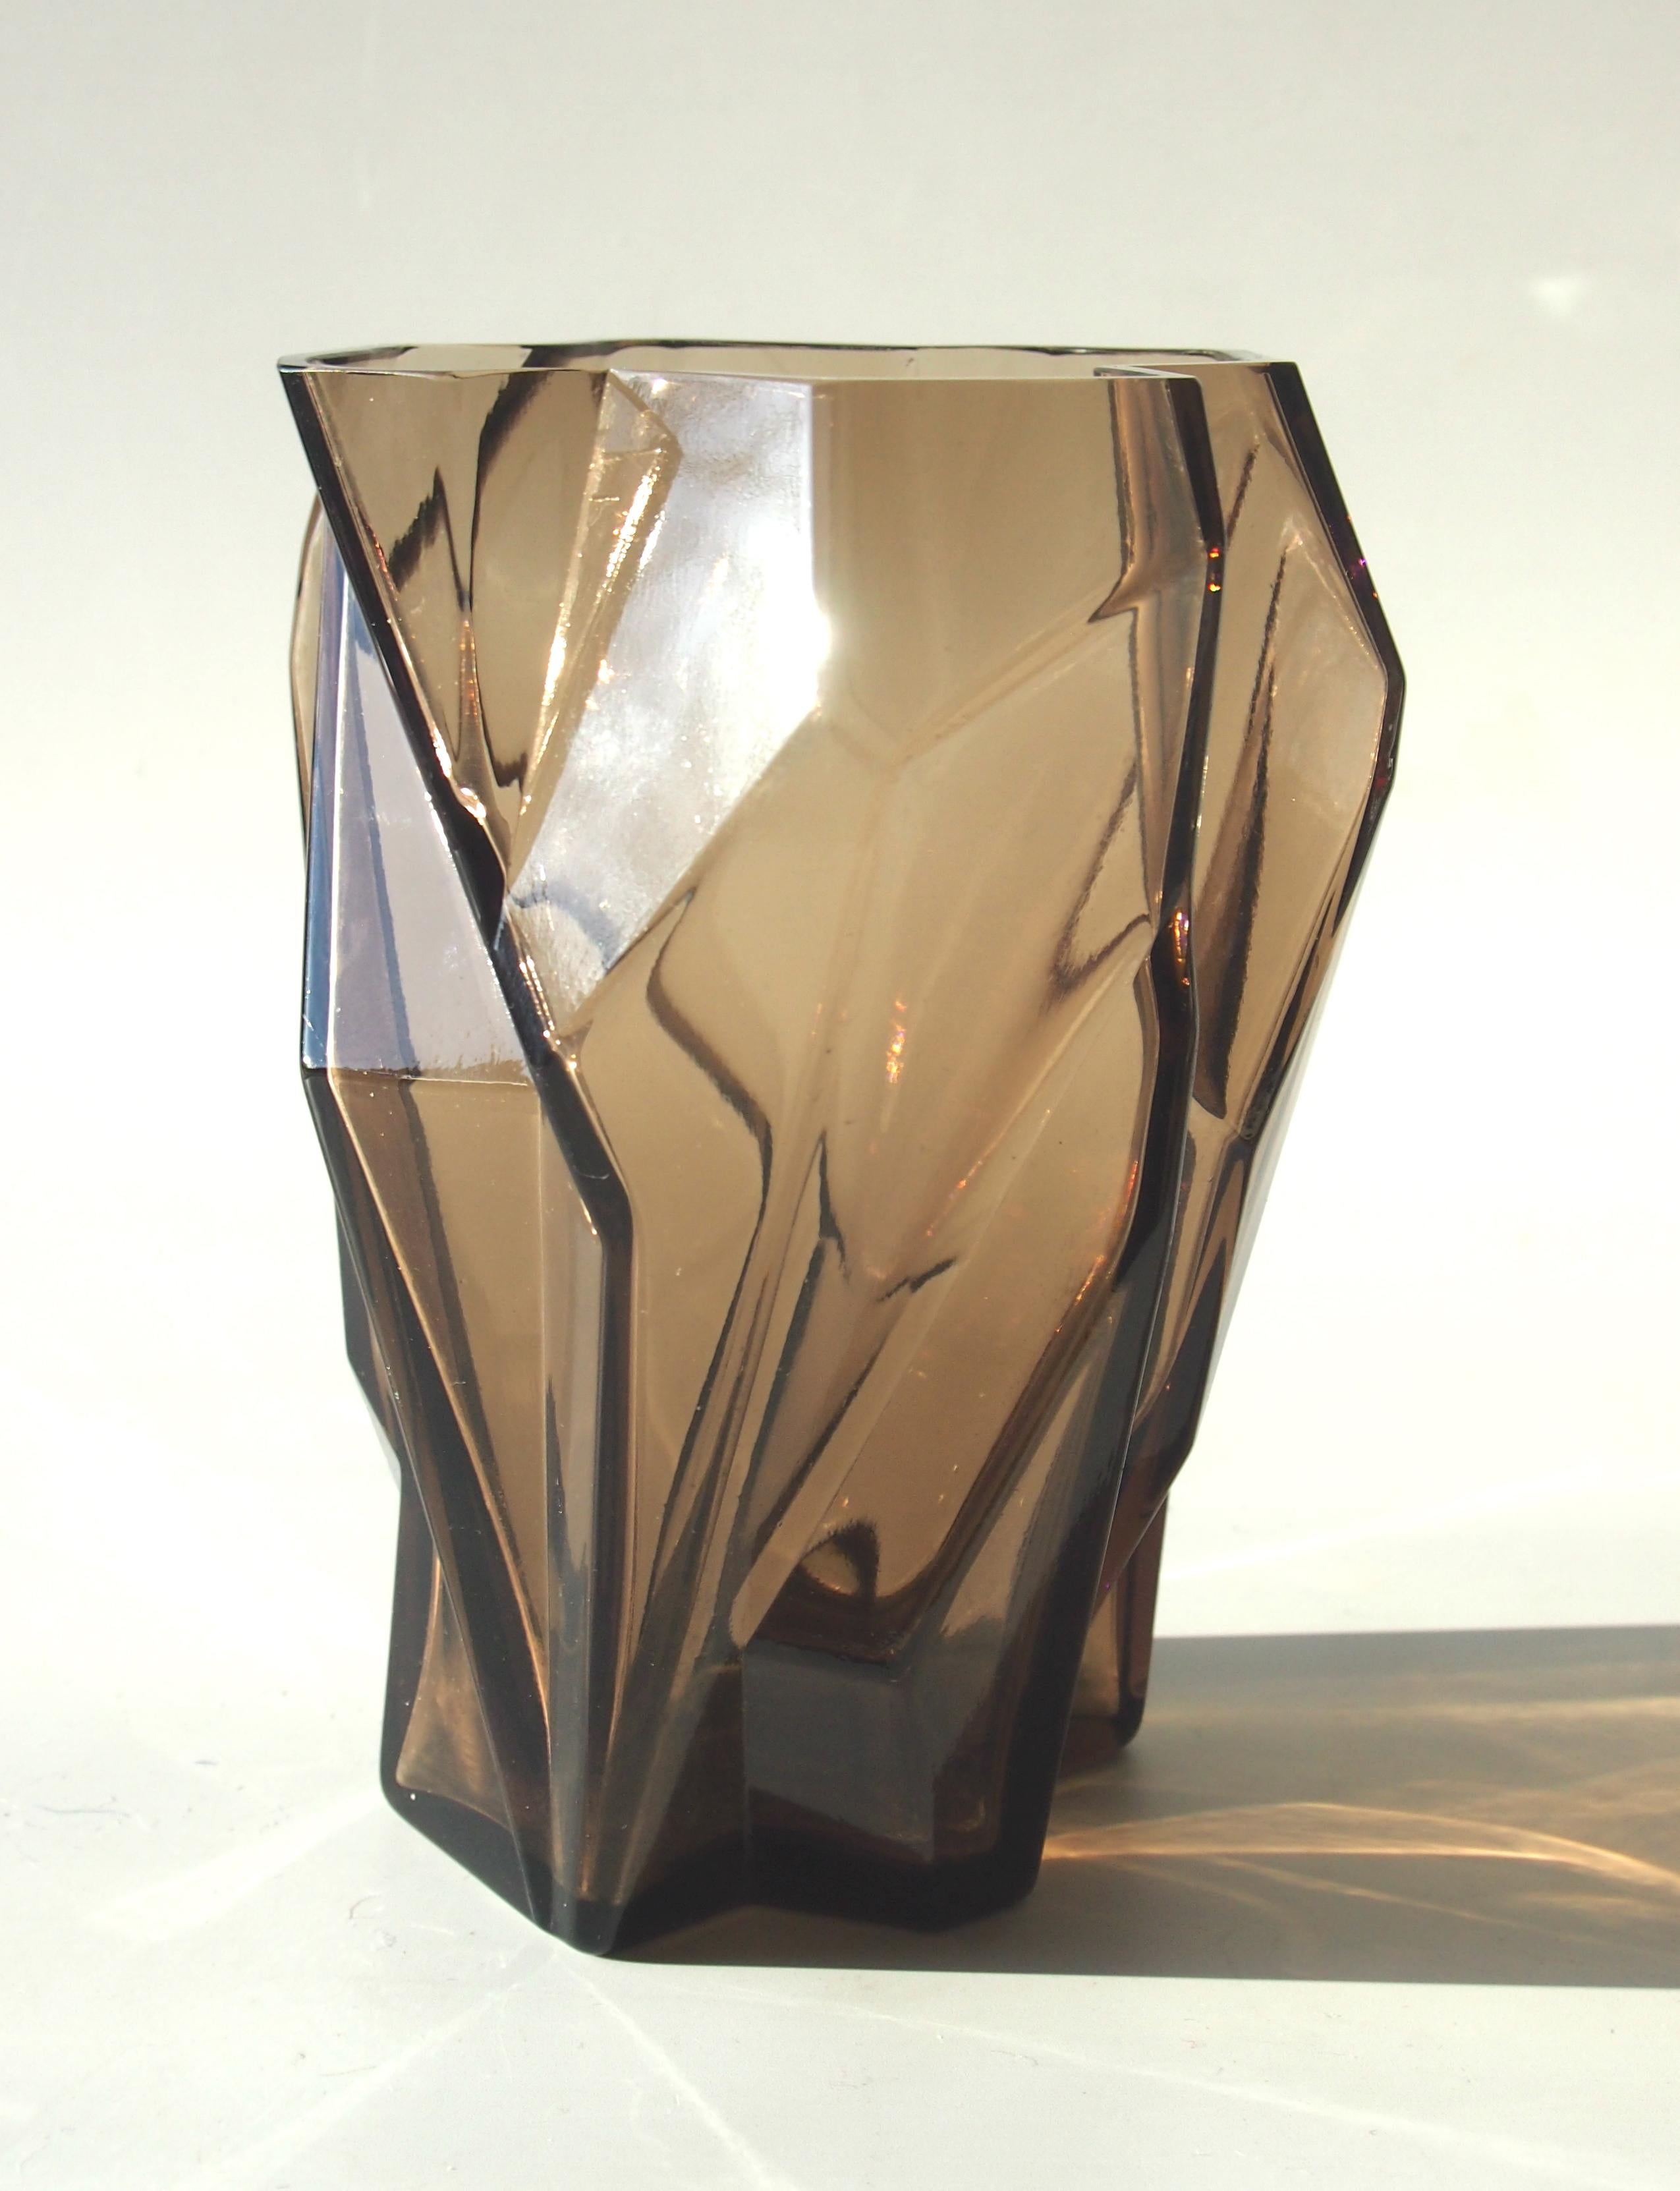 One of the most iconic pieces of glass there is. A topaz Ruba Rombic vase by Phoenix Consolidated Glass designed by Reubin Hailey and produced only between 1927 and 1933. The topaz colour gives it a interesting mix of brown and purple highlights.